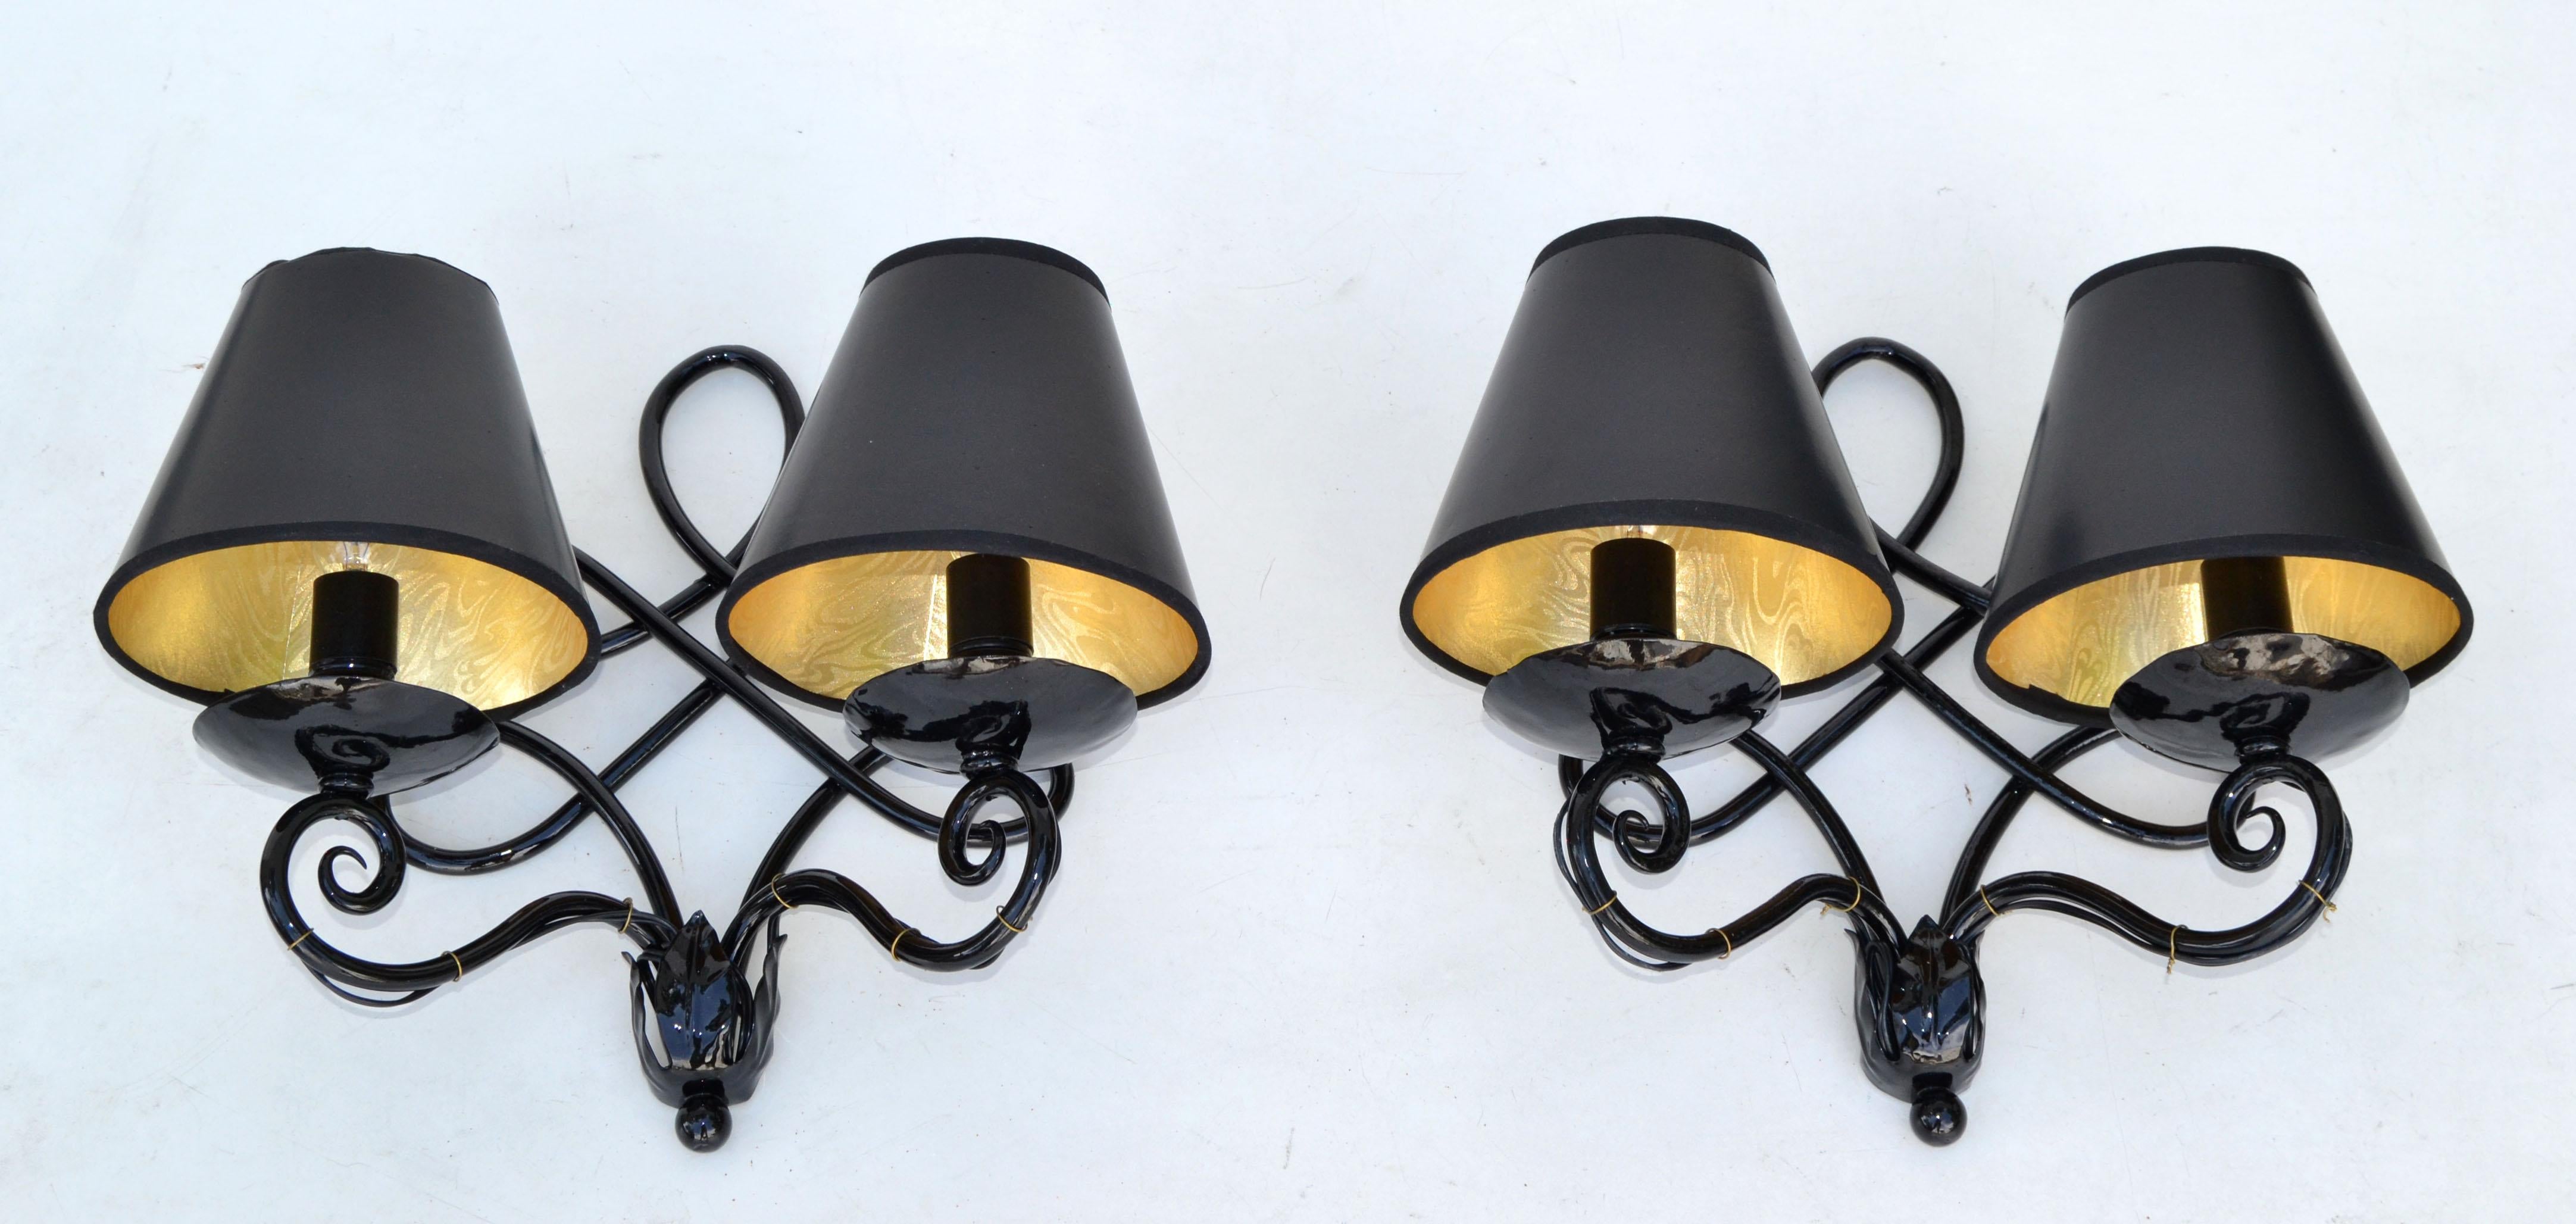 Powder-Coated 1940 French 2 Lights Wrought Iron Wall Sconces Black Gloss Finish Art Deco, Pair